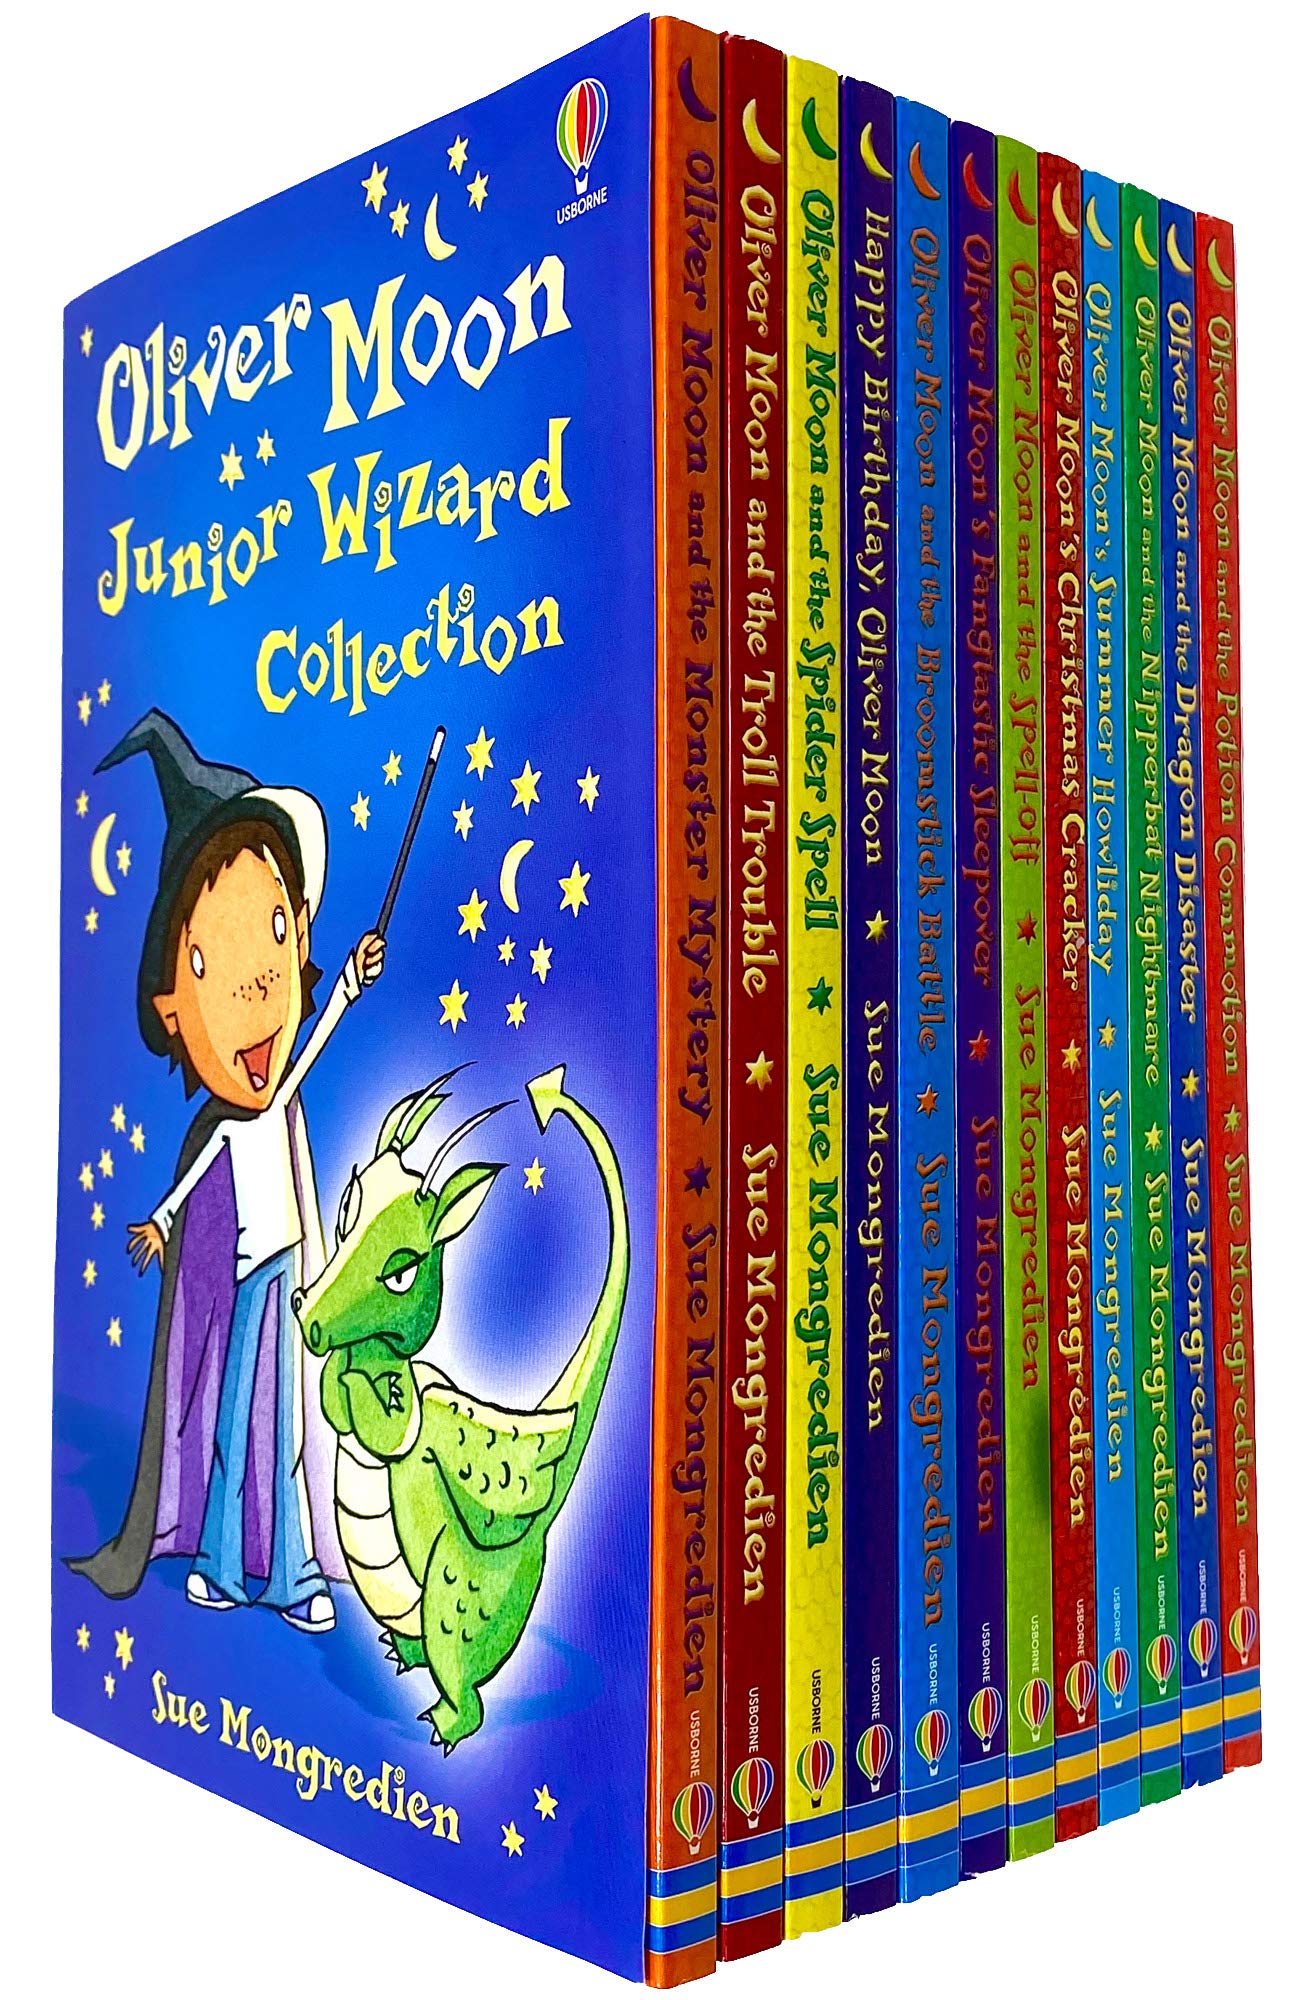 Oliver Moon Junior Wizard Series Collection 12 Books Set by Sue Mongredien Paperback - Lets Buy Books